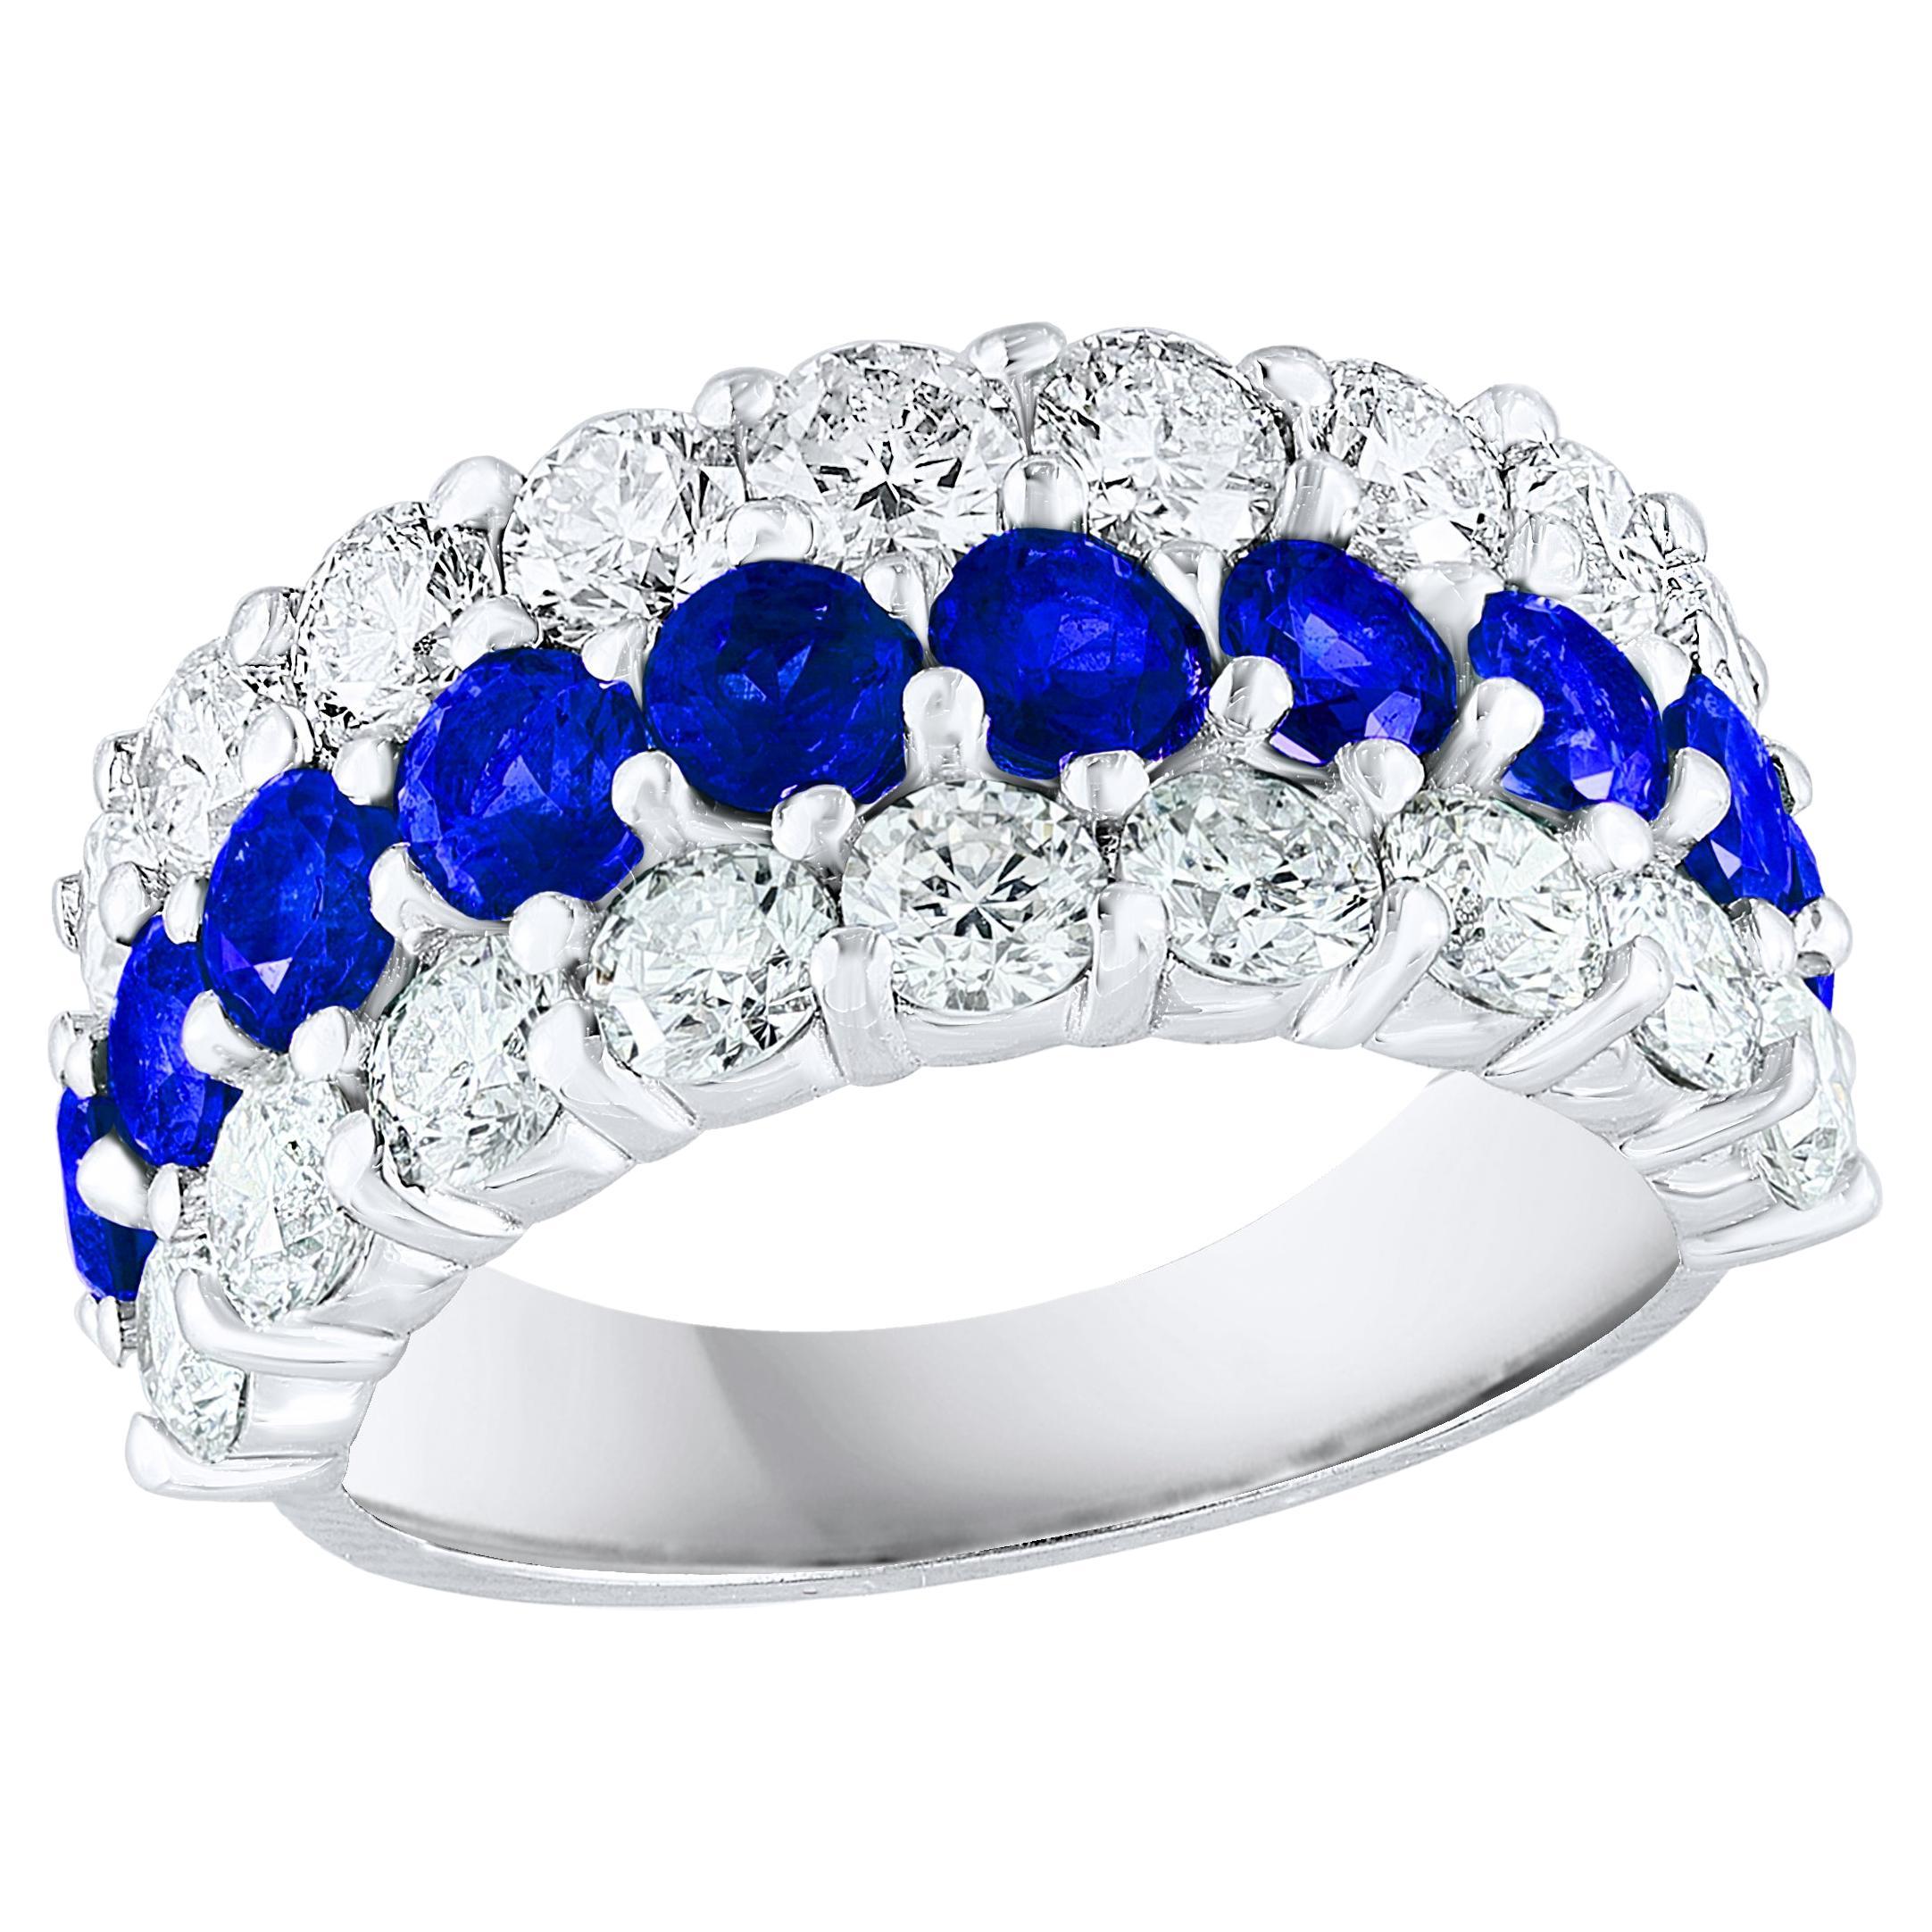 2.60 Ct Round Shape Sapphire and Diamond Three Row Band Ring in 14K White Gold